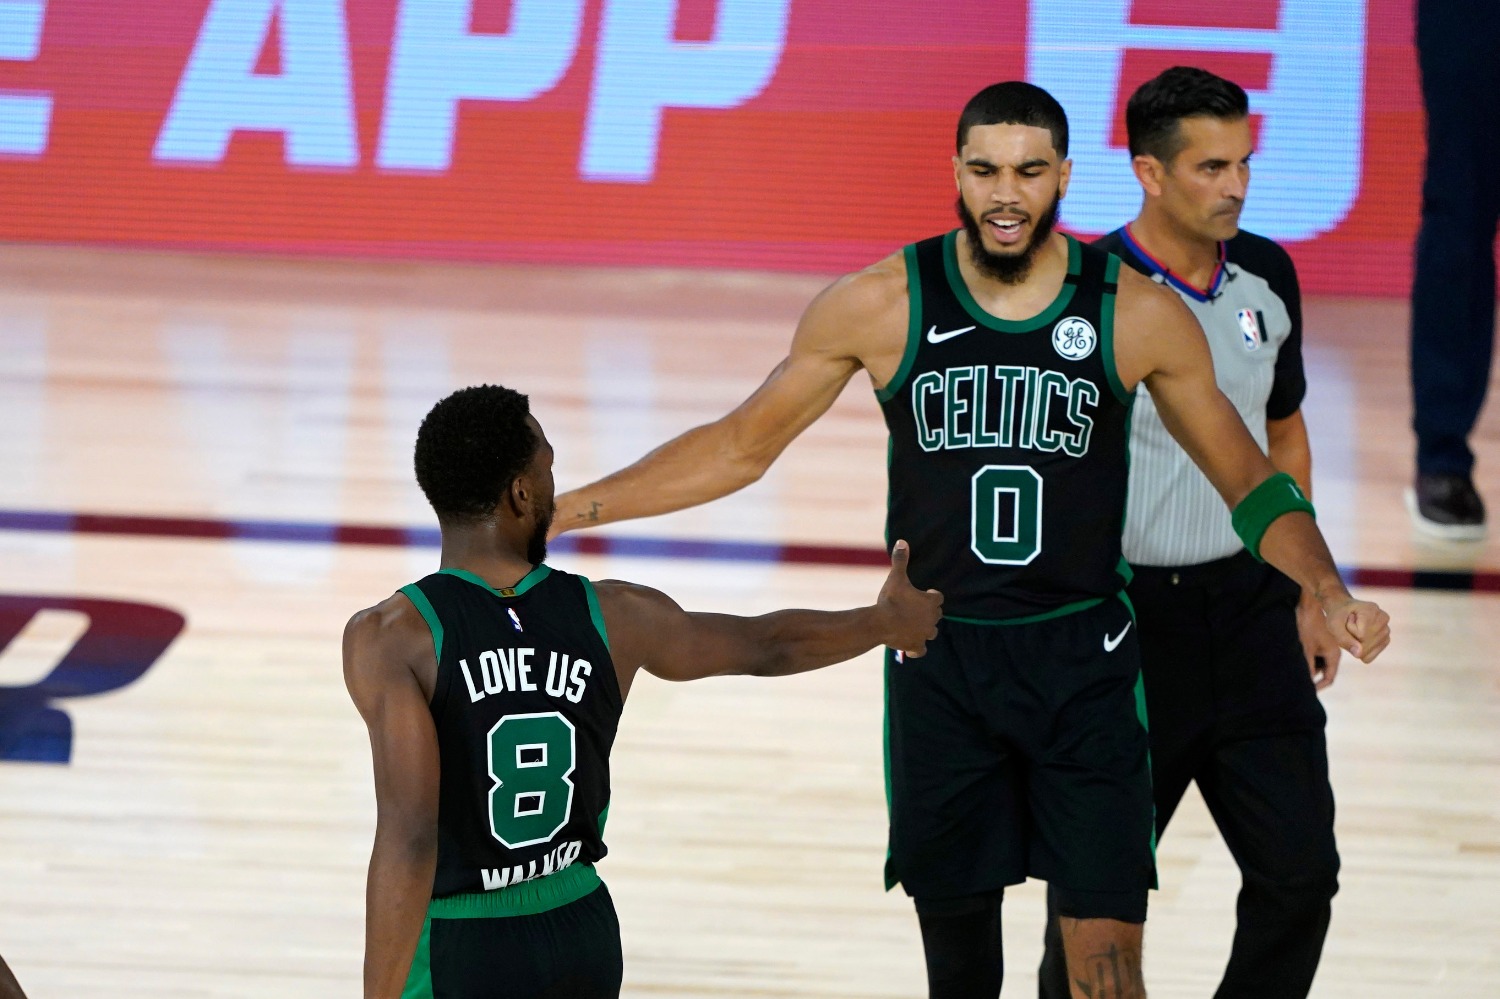 Jayson Tatum etched his name in Celtics history by toppling Larry Bird.